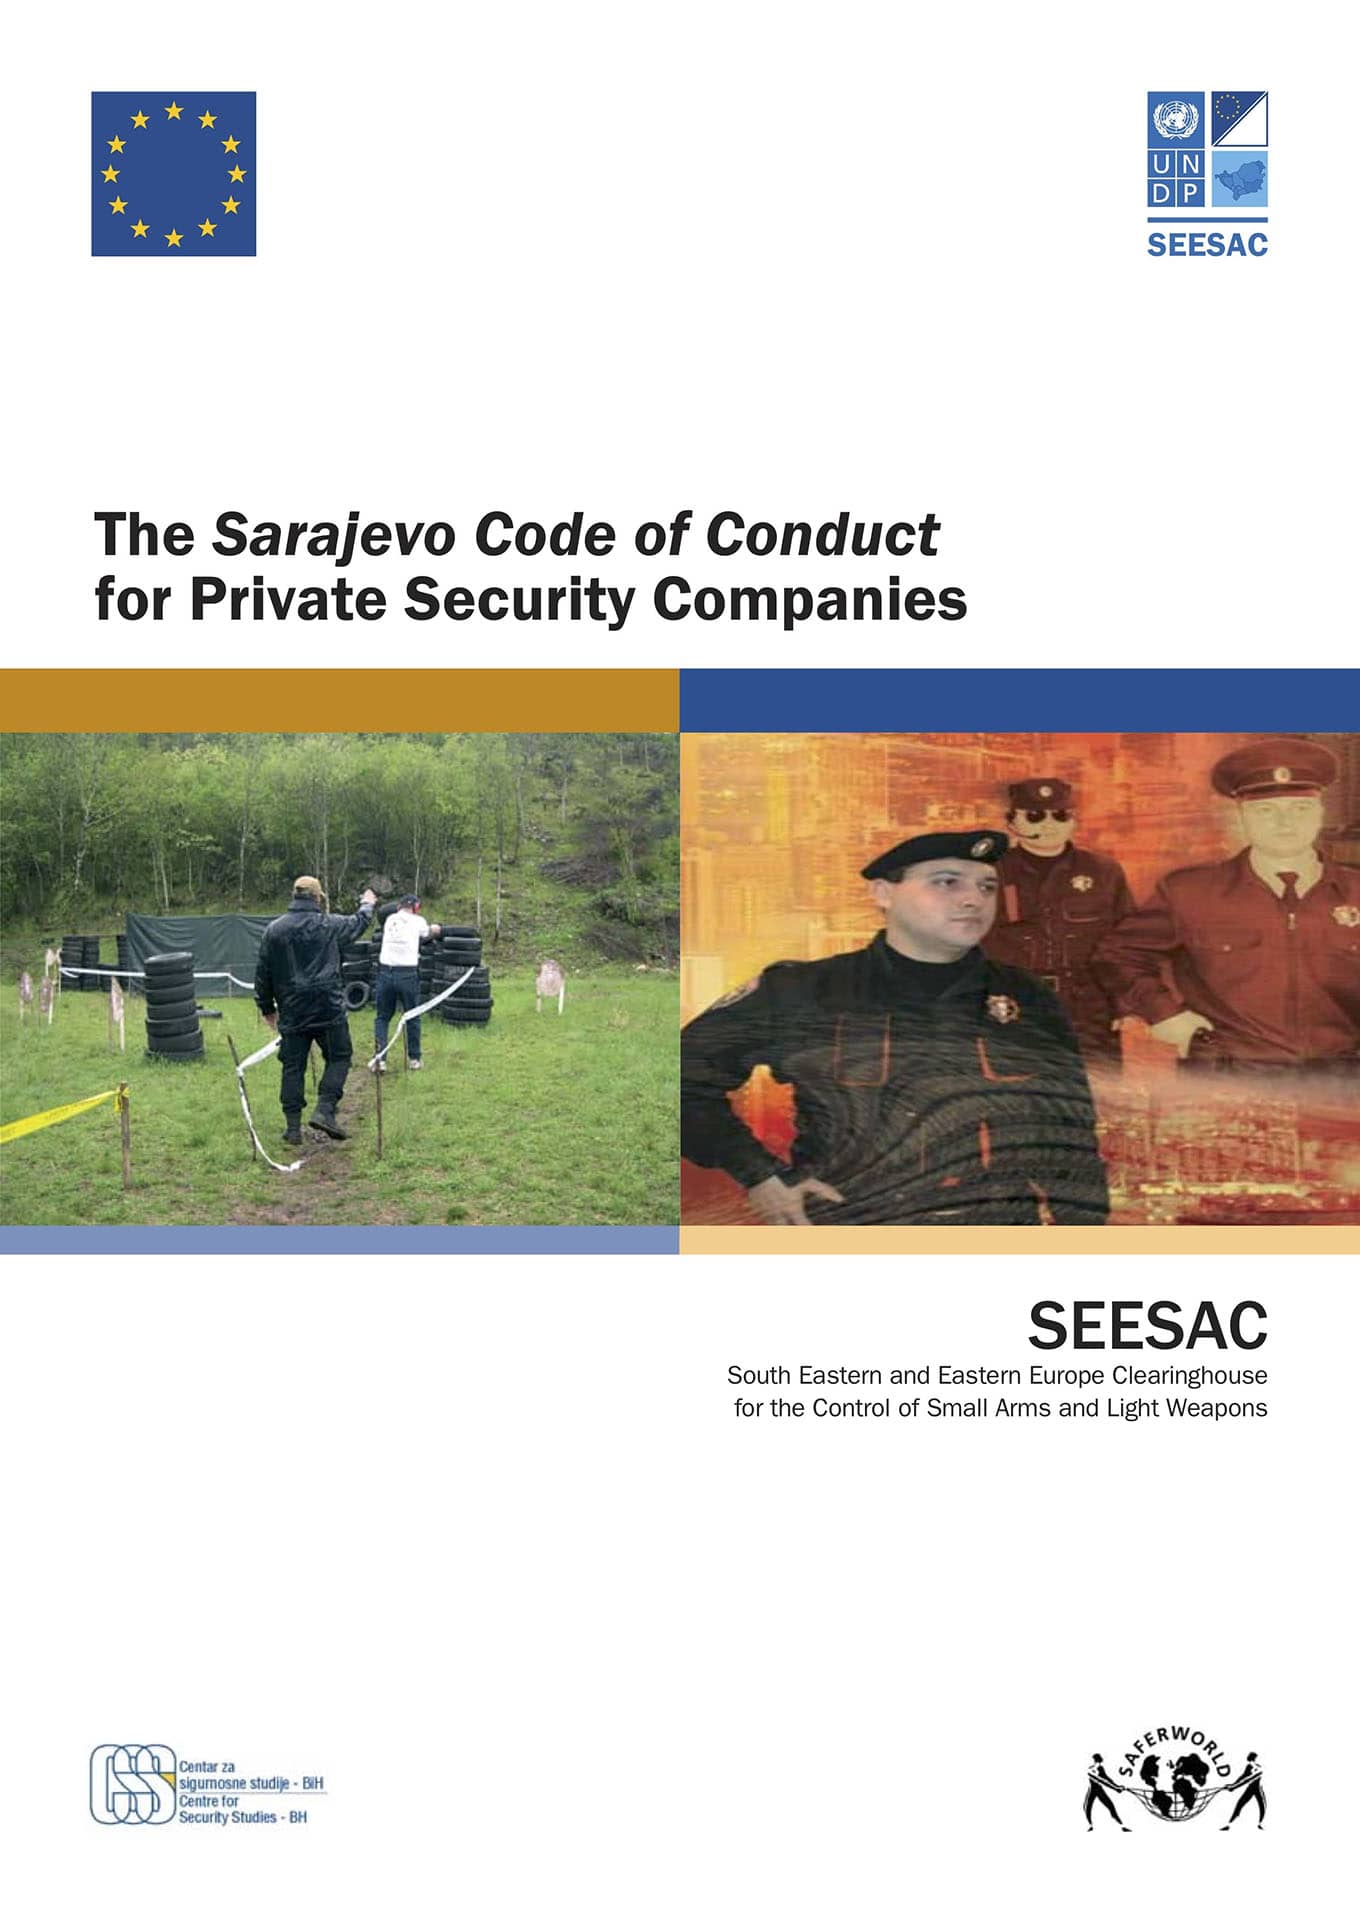 The Sarajevo Code of Conduct for Private Security Companies (SEESAC, 2006)